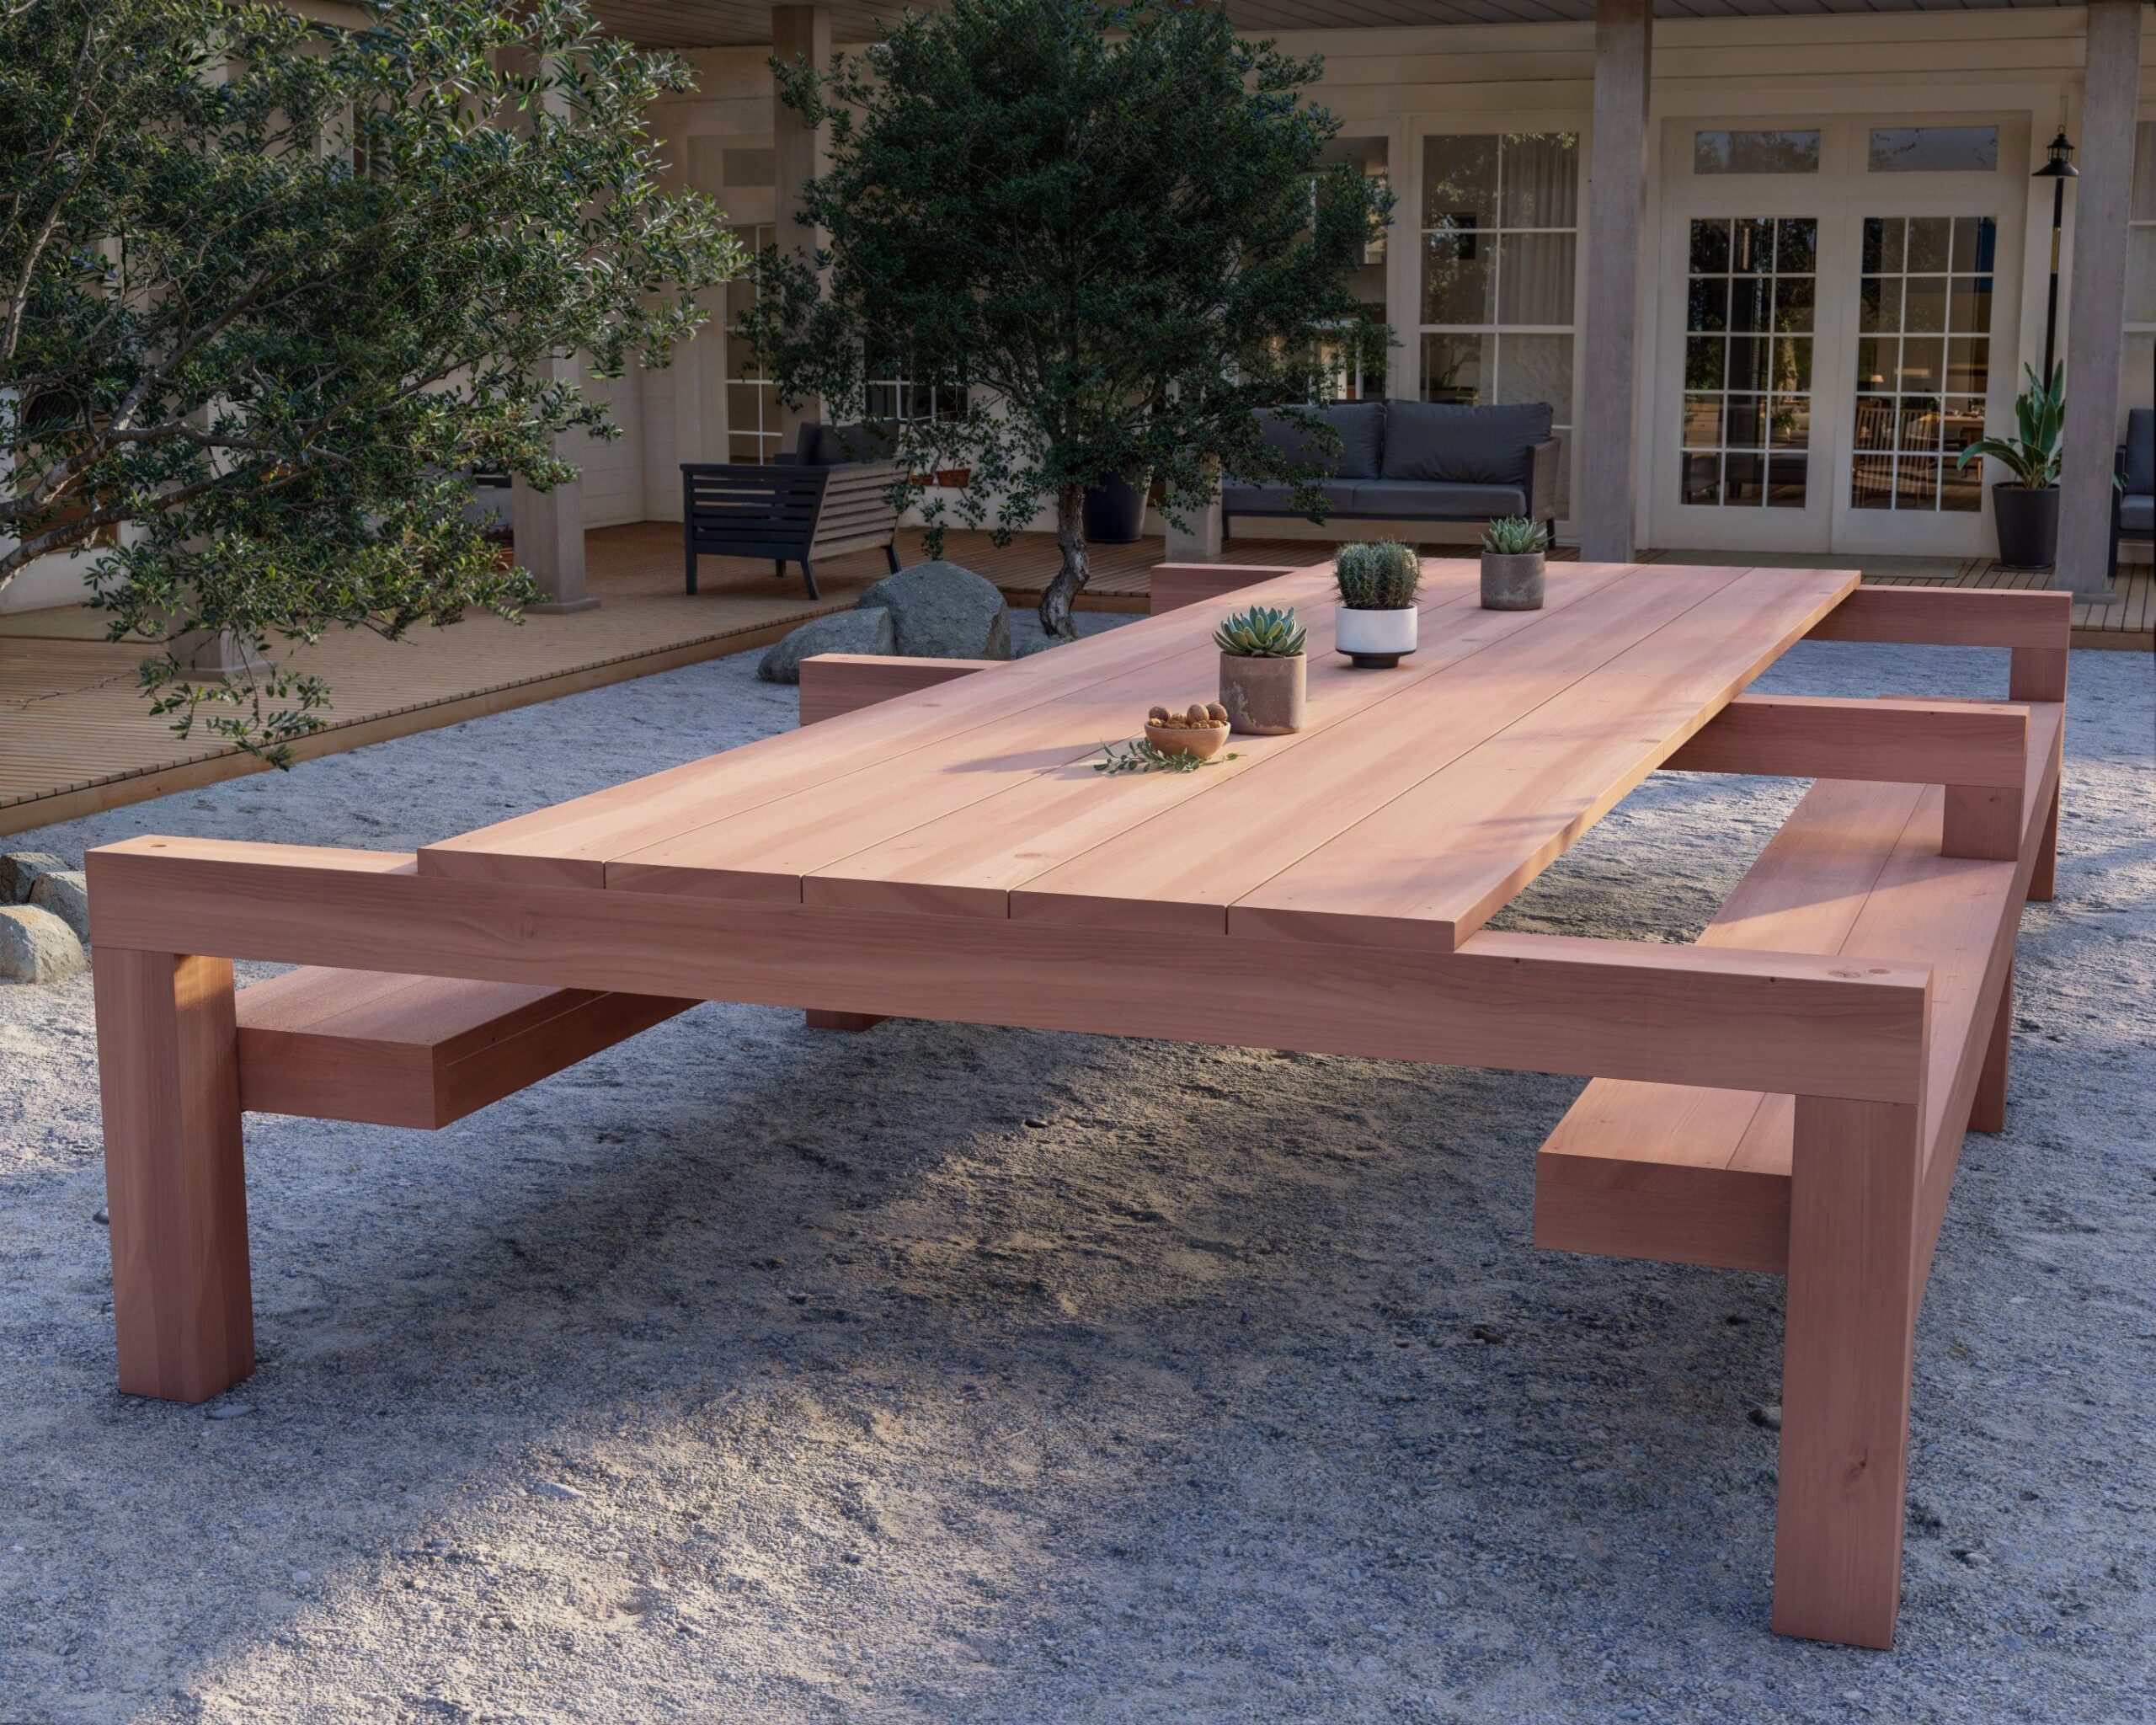 The Beauty of Handcrafted Wooden Outdoor Furniture